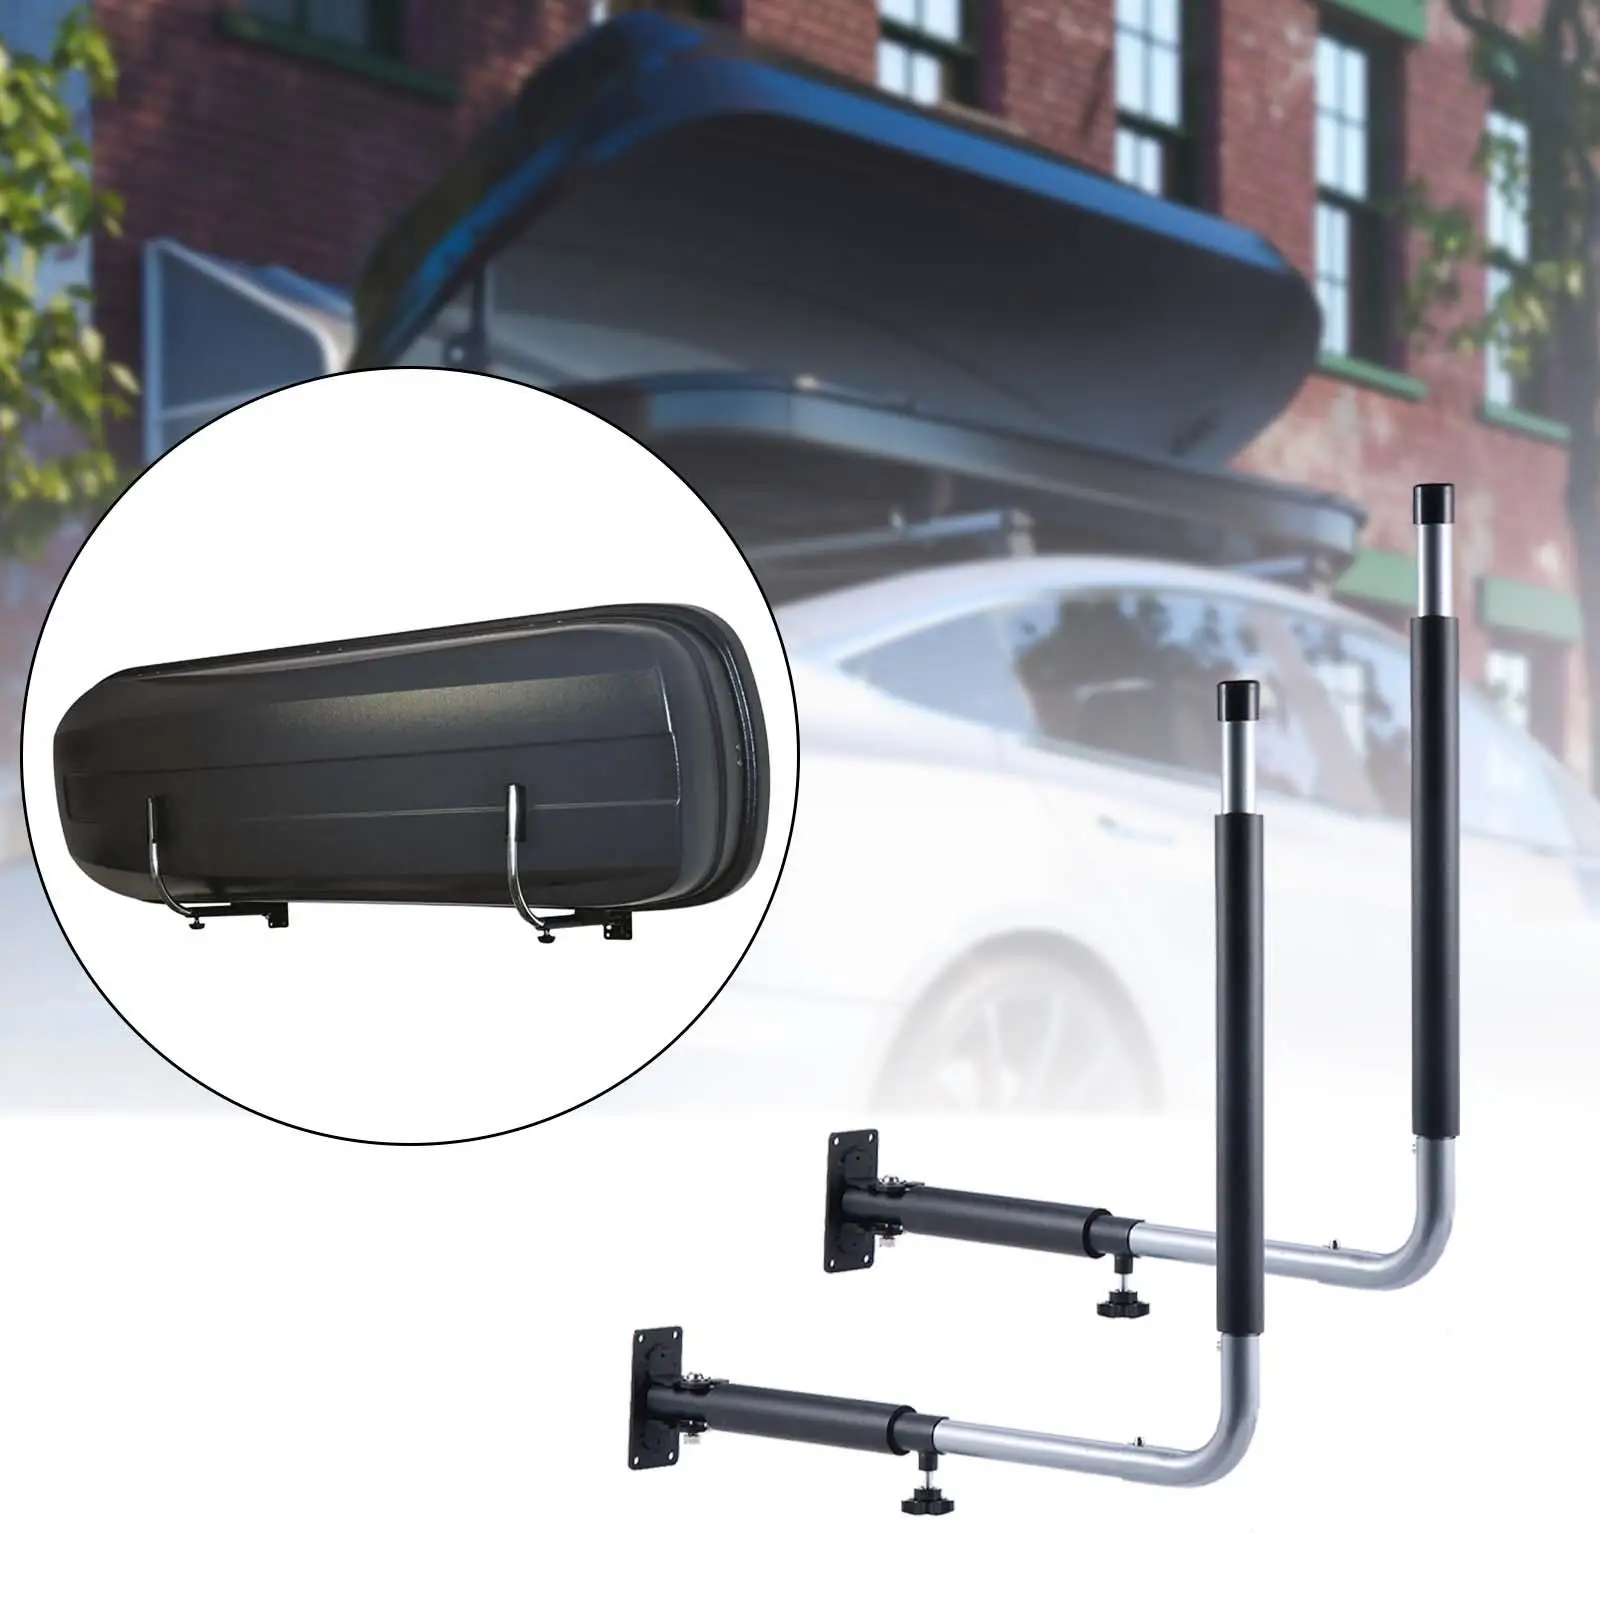 Folding Car Roof Box Wall Mount Rack with Adjustable Arm Kayak Storage Hook for Surfing Board